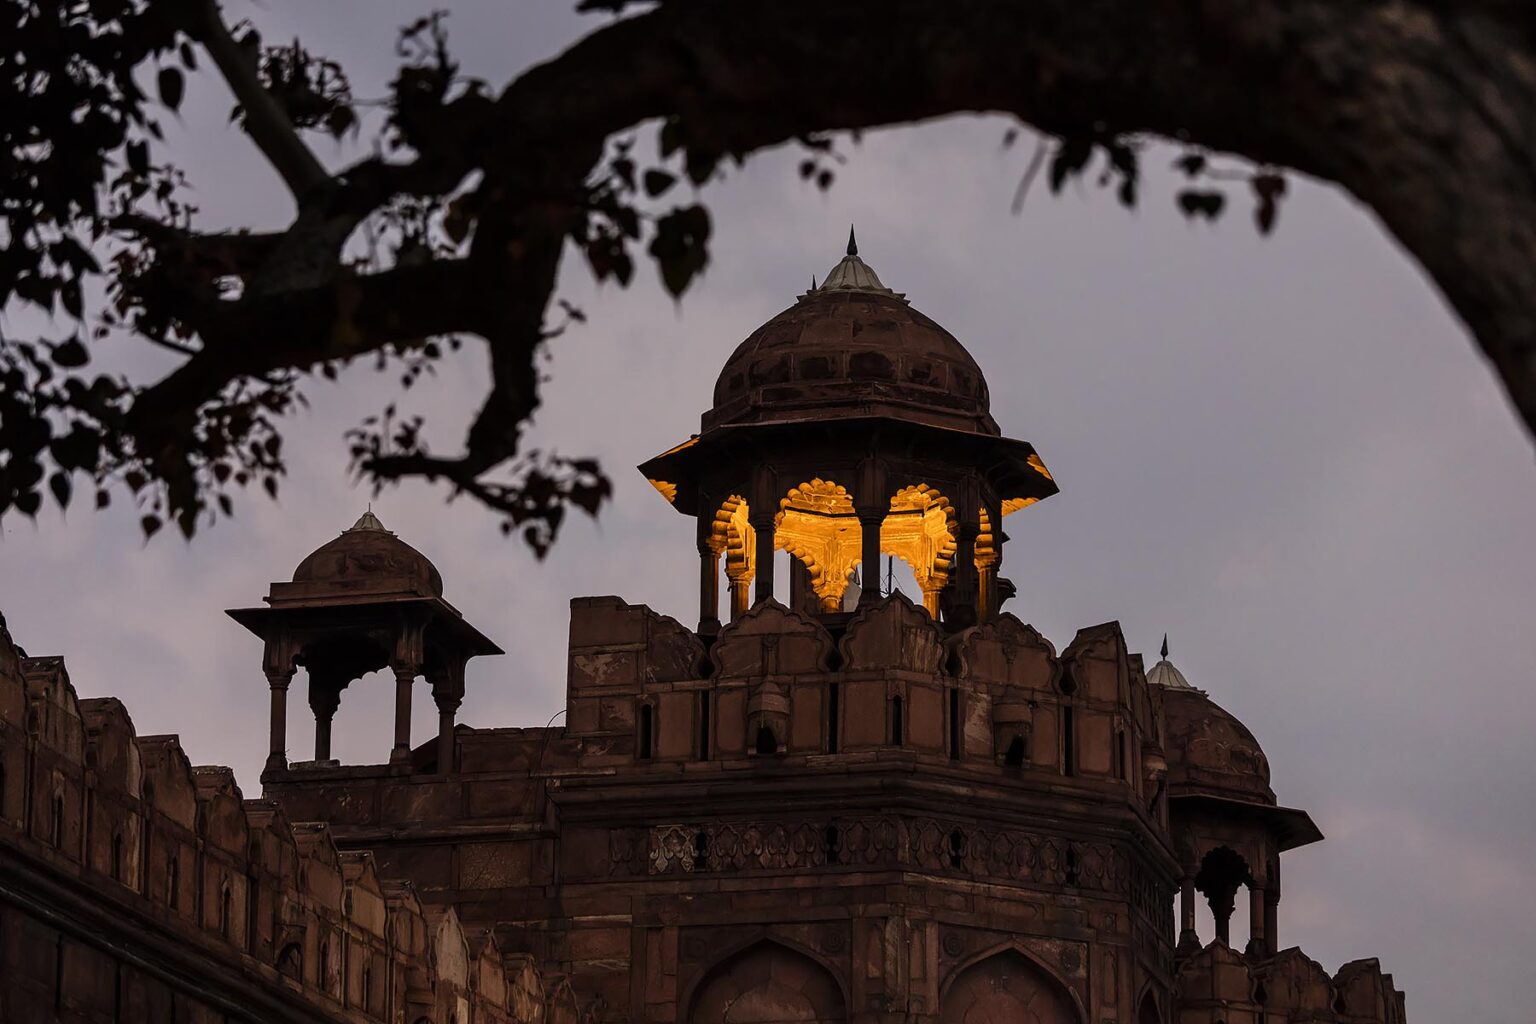 The RED FORT at dusk - NEW DELH, INDIA